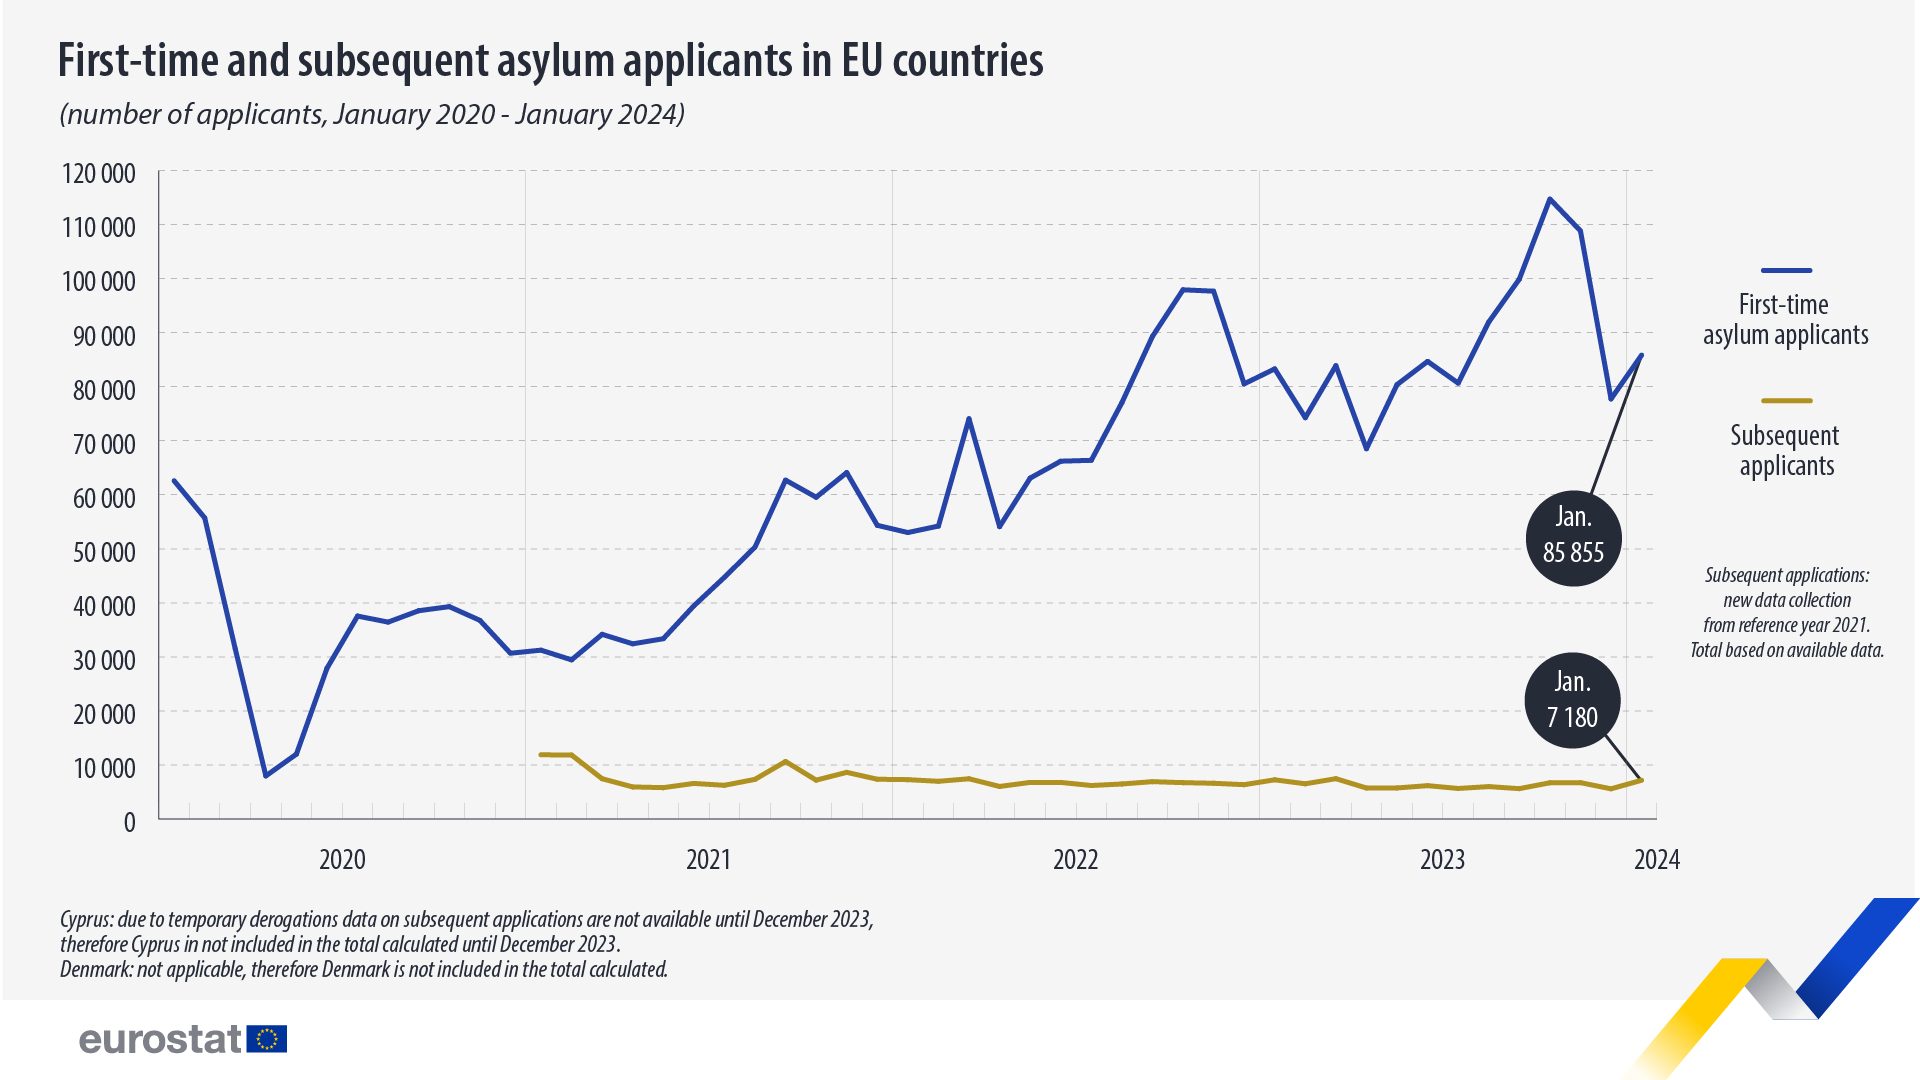 First time and subsequent asylum applicants in the EU countries, number of applicants, January 2020 - January 2024. Chart. See link to full dataset below.